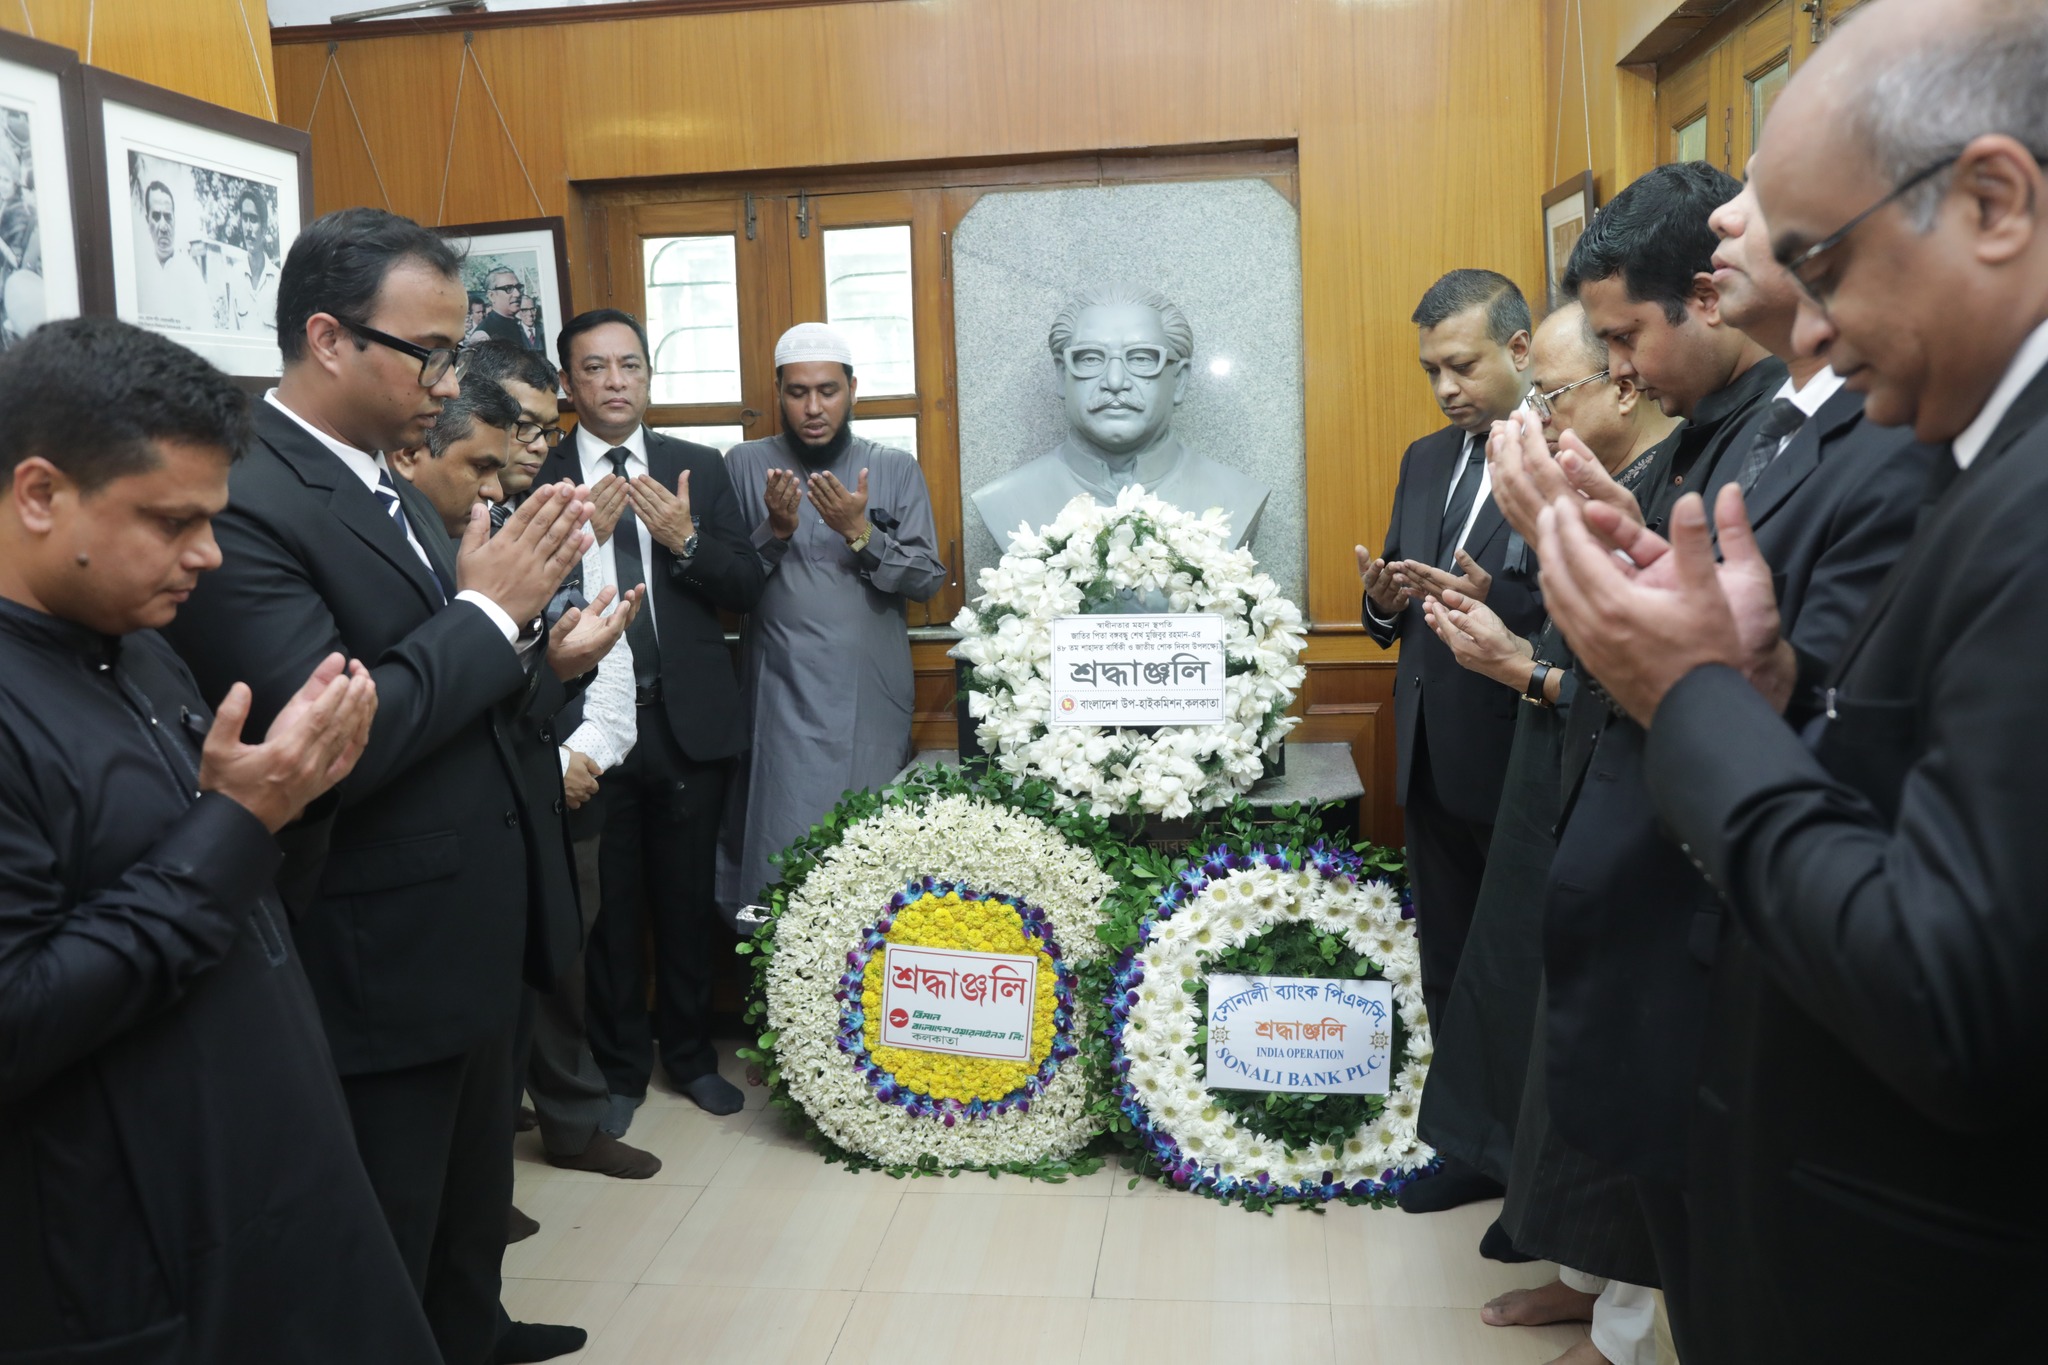 Bangladesh Deputy High Commission in Kolkata organized day long program to observe the “National Mourning Day” on 15 August 2023 with due solemnity